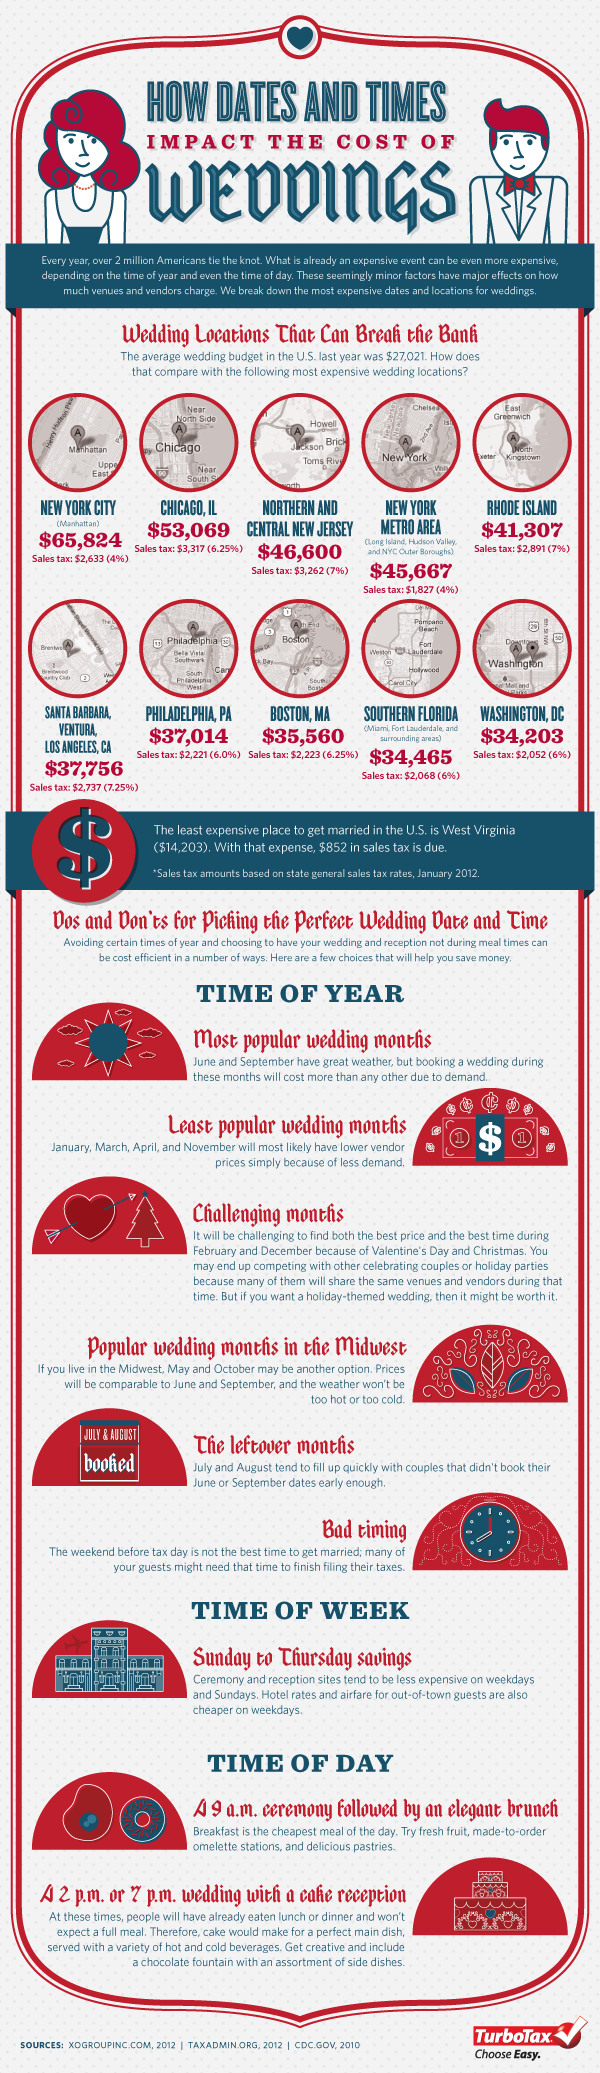 Wedding Dates Times infographic